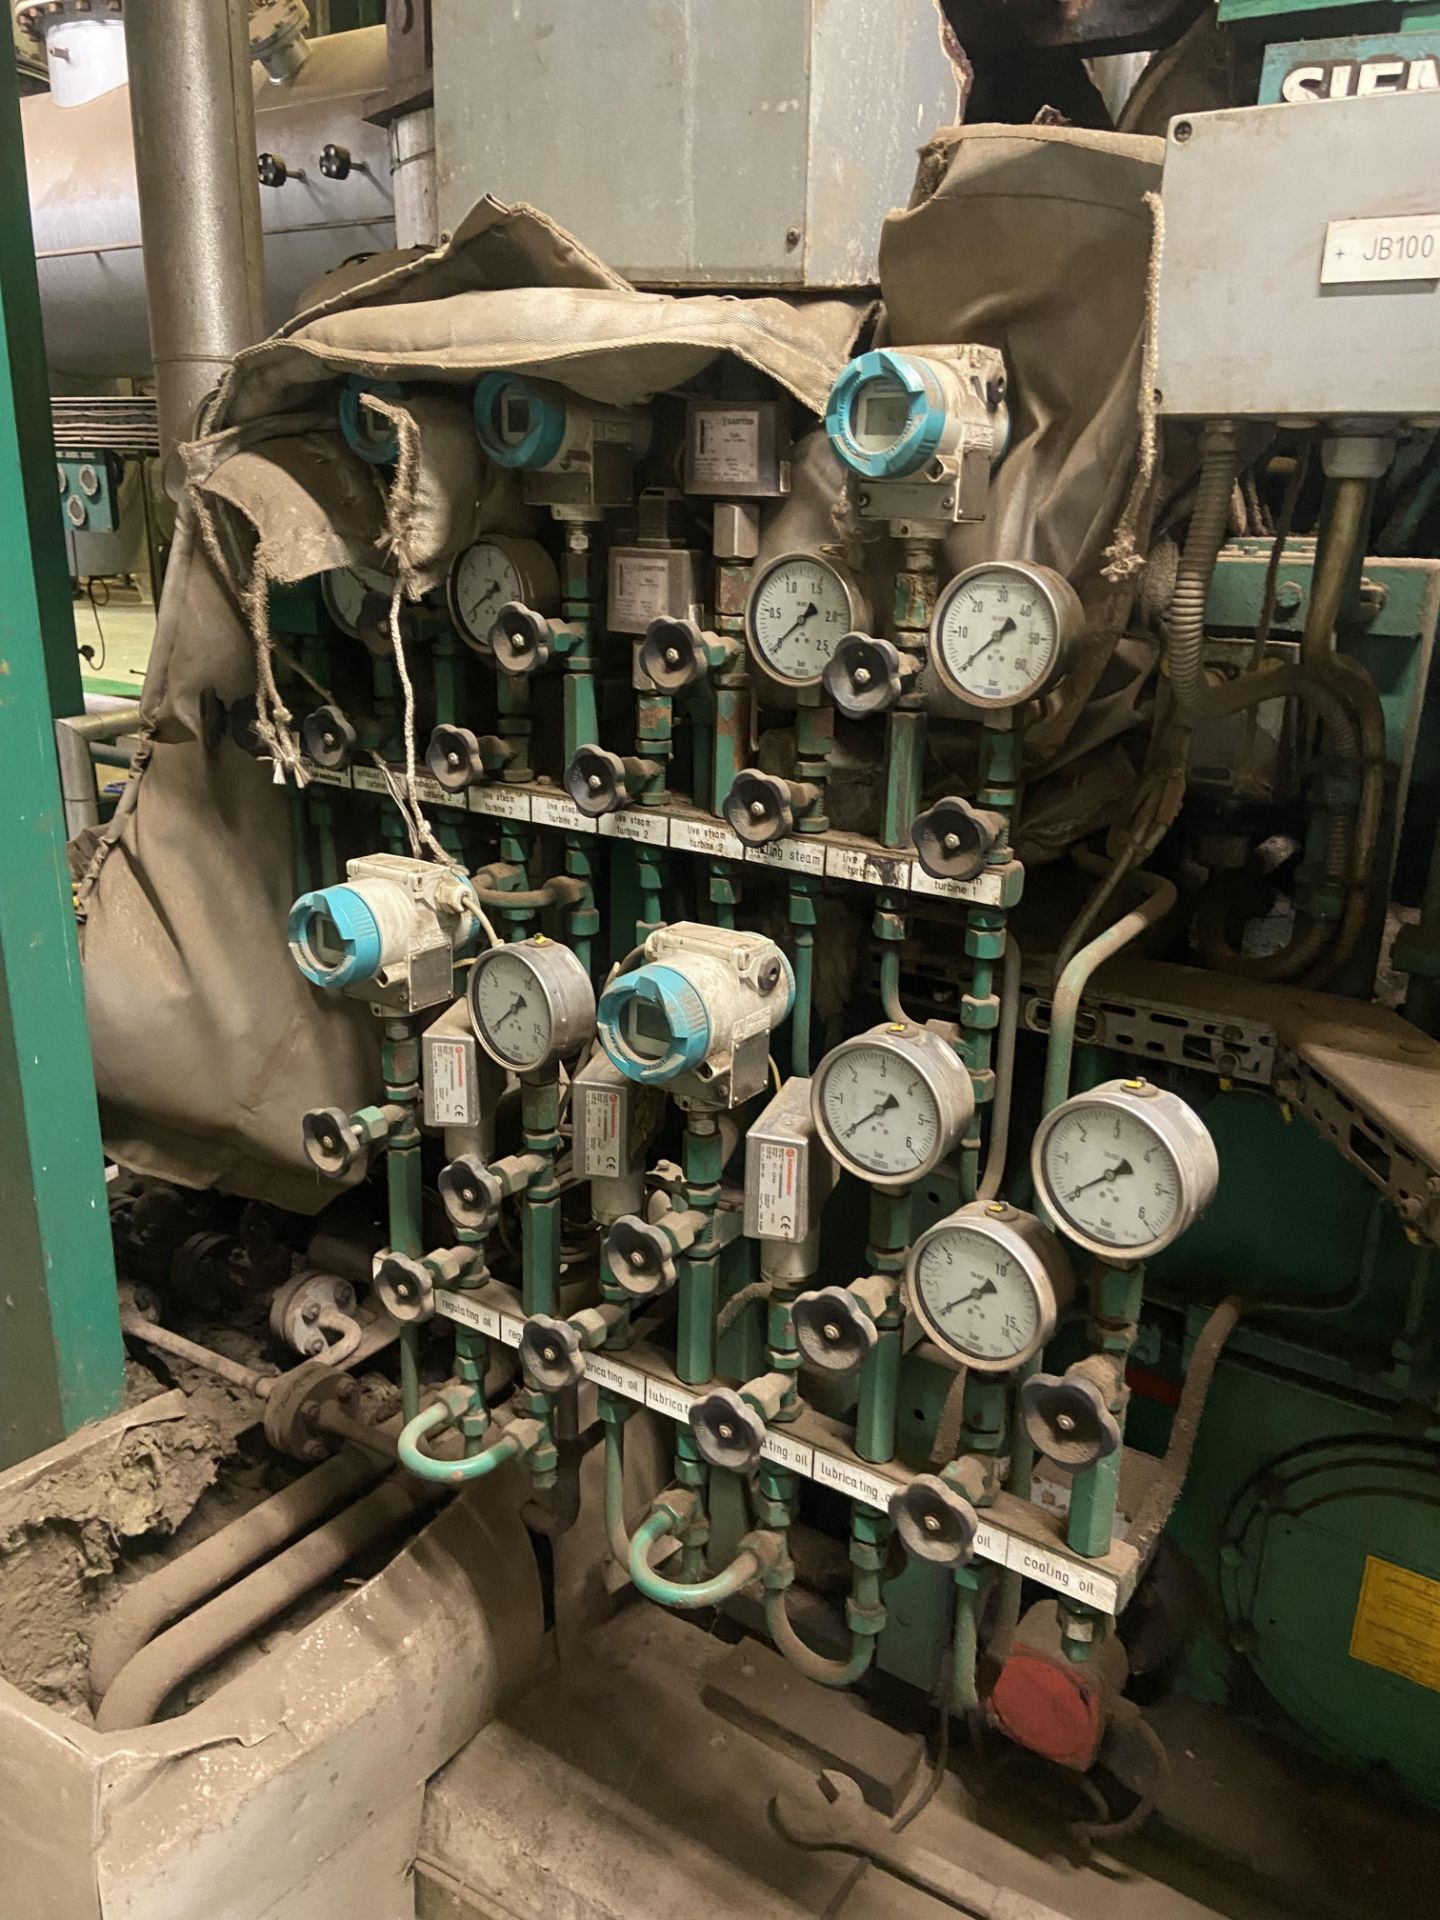 Siemens TWIN-CA36 STEAM TURBINE, serial no. 4.736.023, year of manufacture 2008, output 3119kW ( - Image 9 of 9